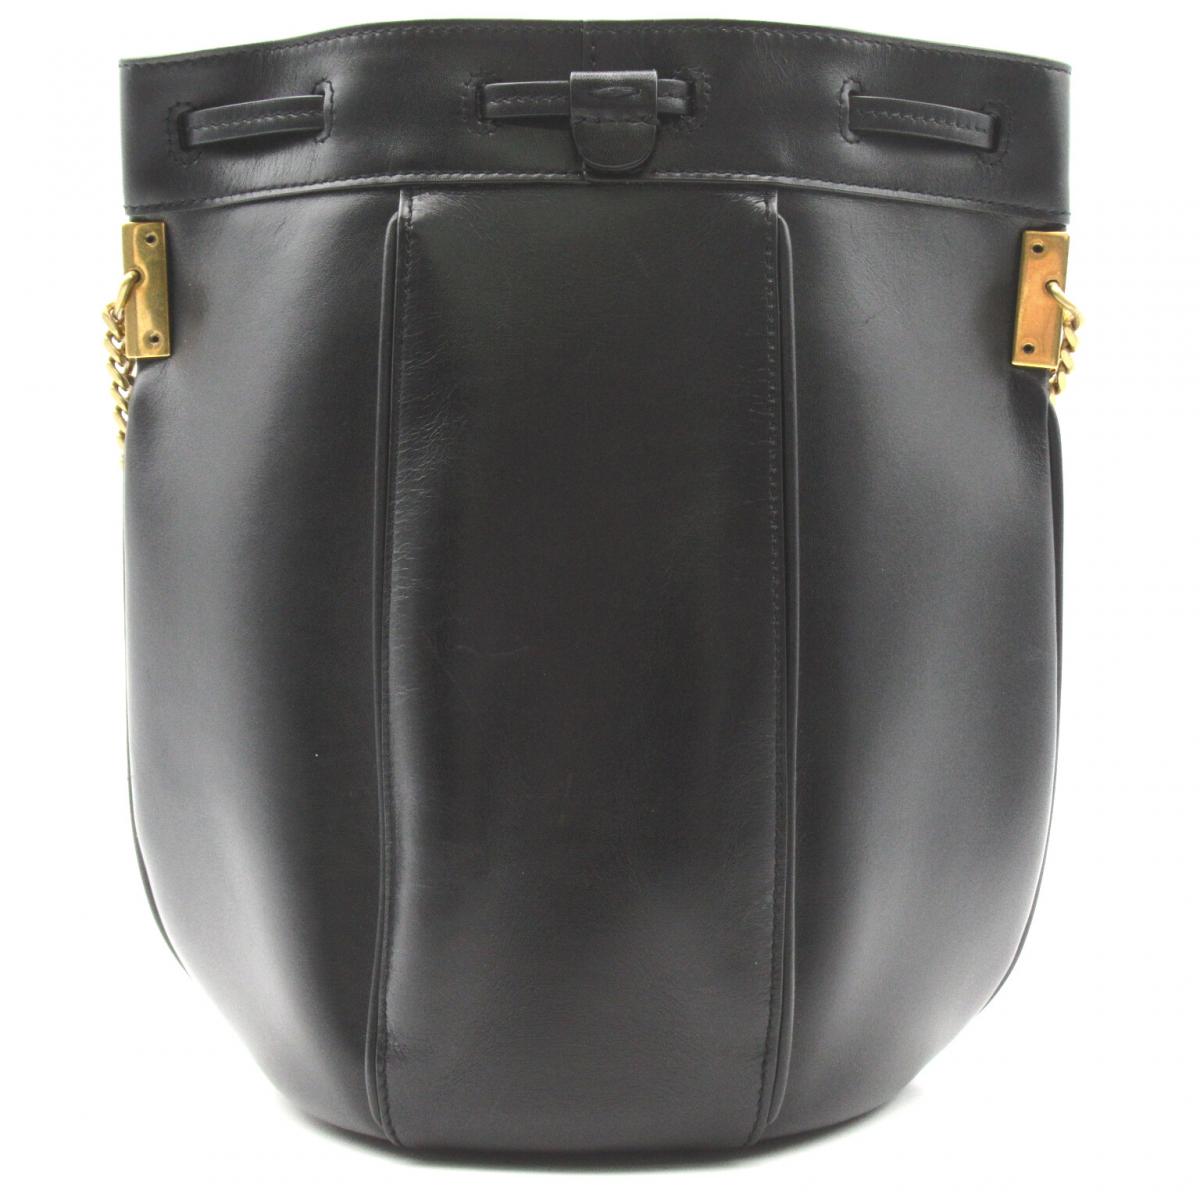 Chain Strap Leather Bucket Bag